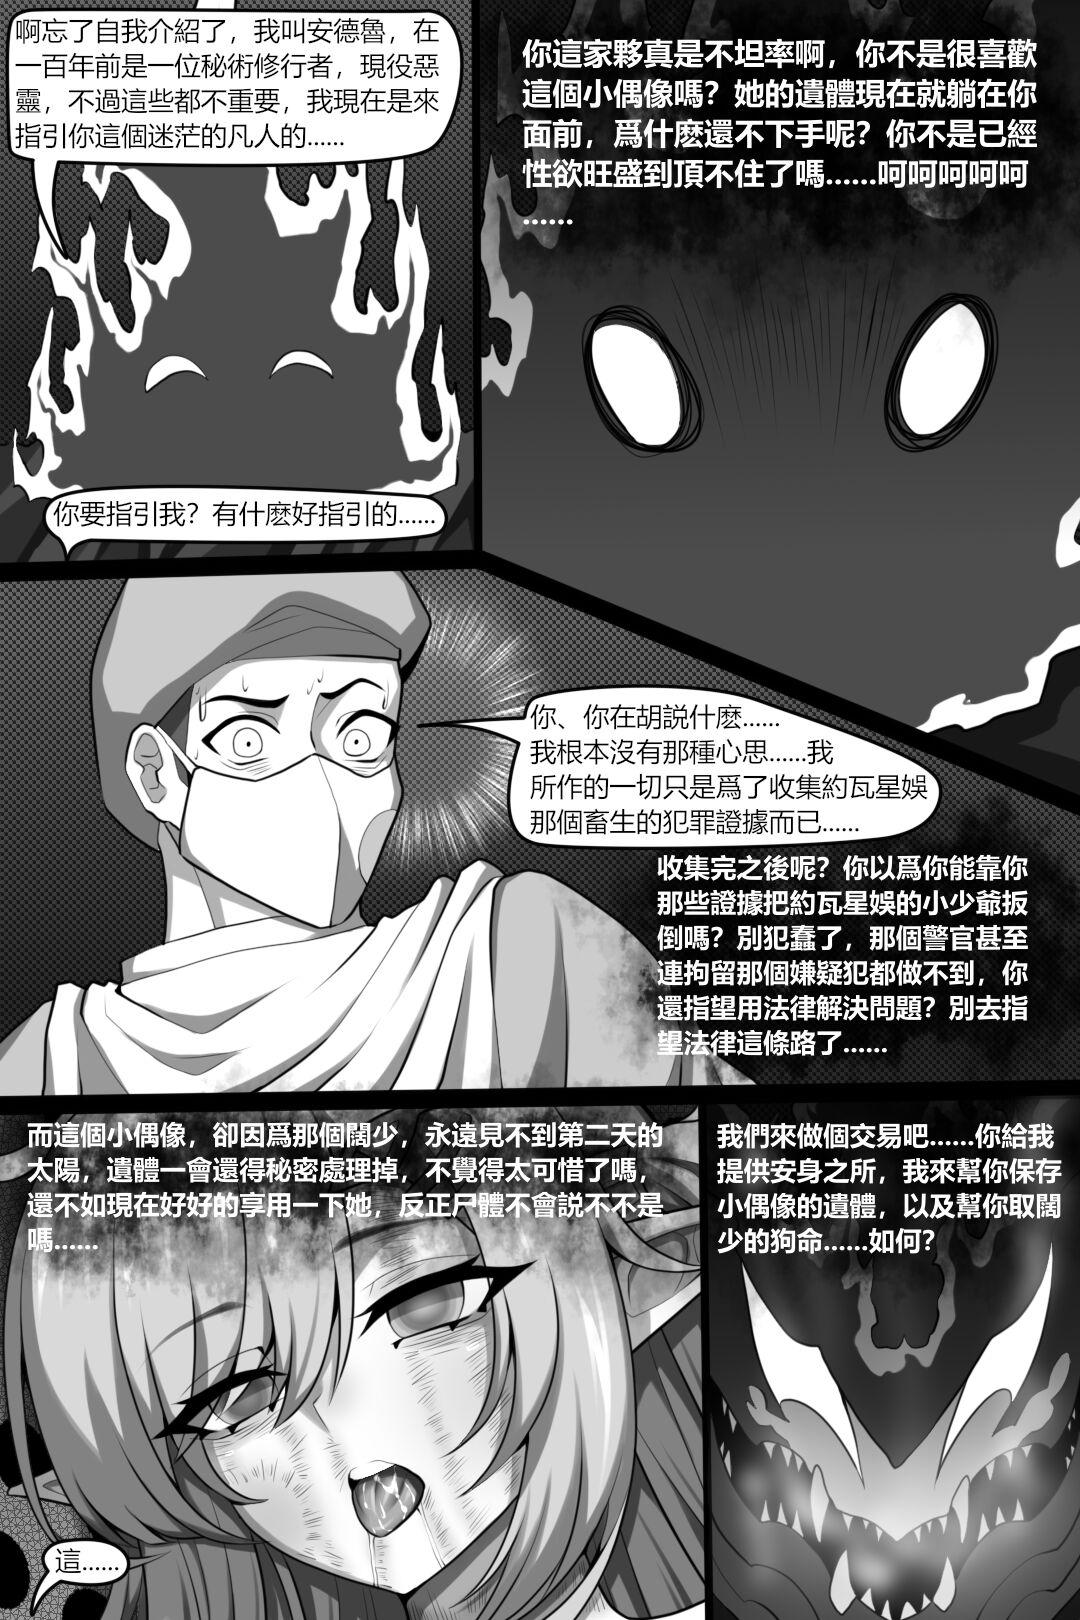 Bin Lian City Stories Chapter 3: Corrupted Forensic 21